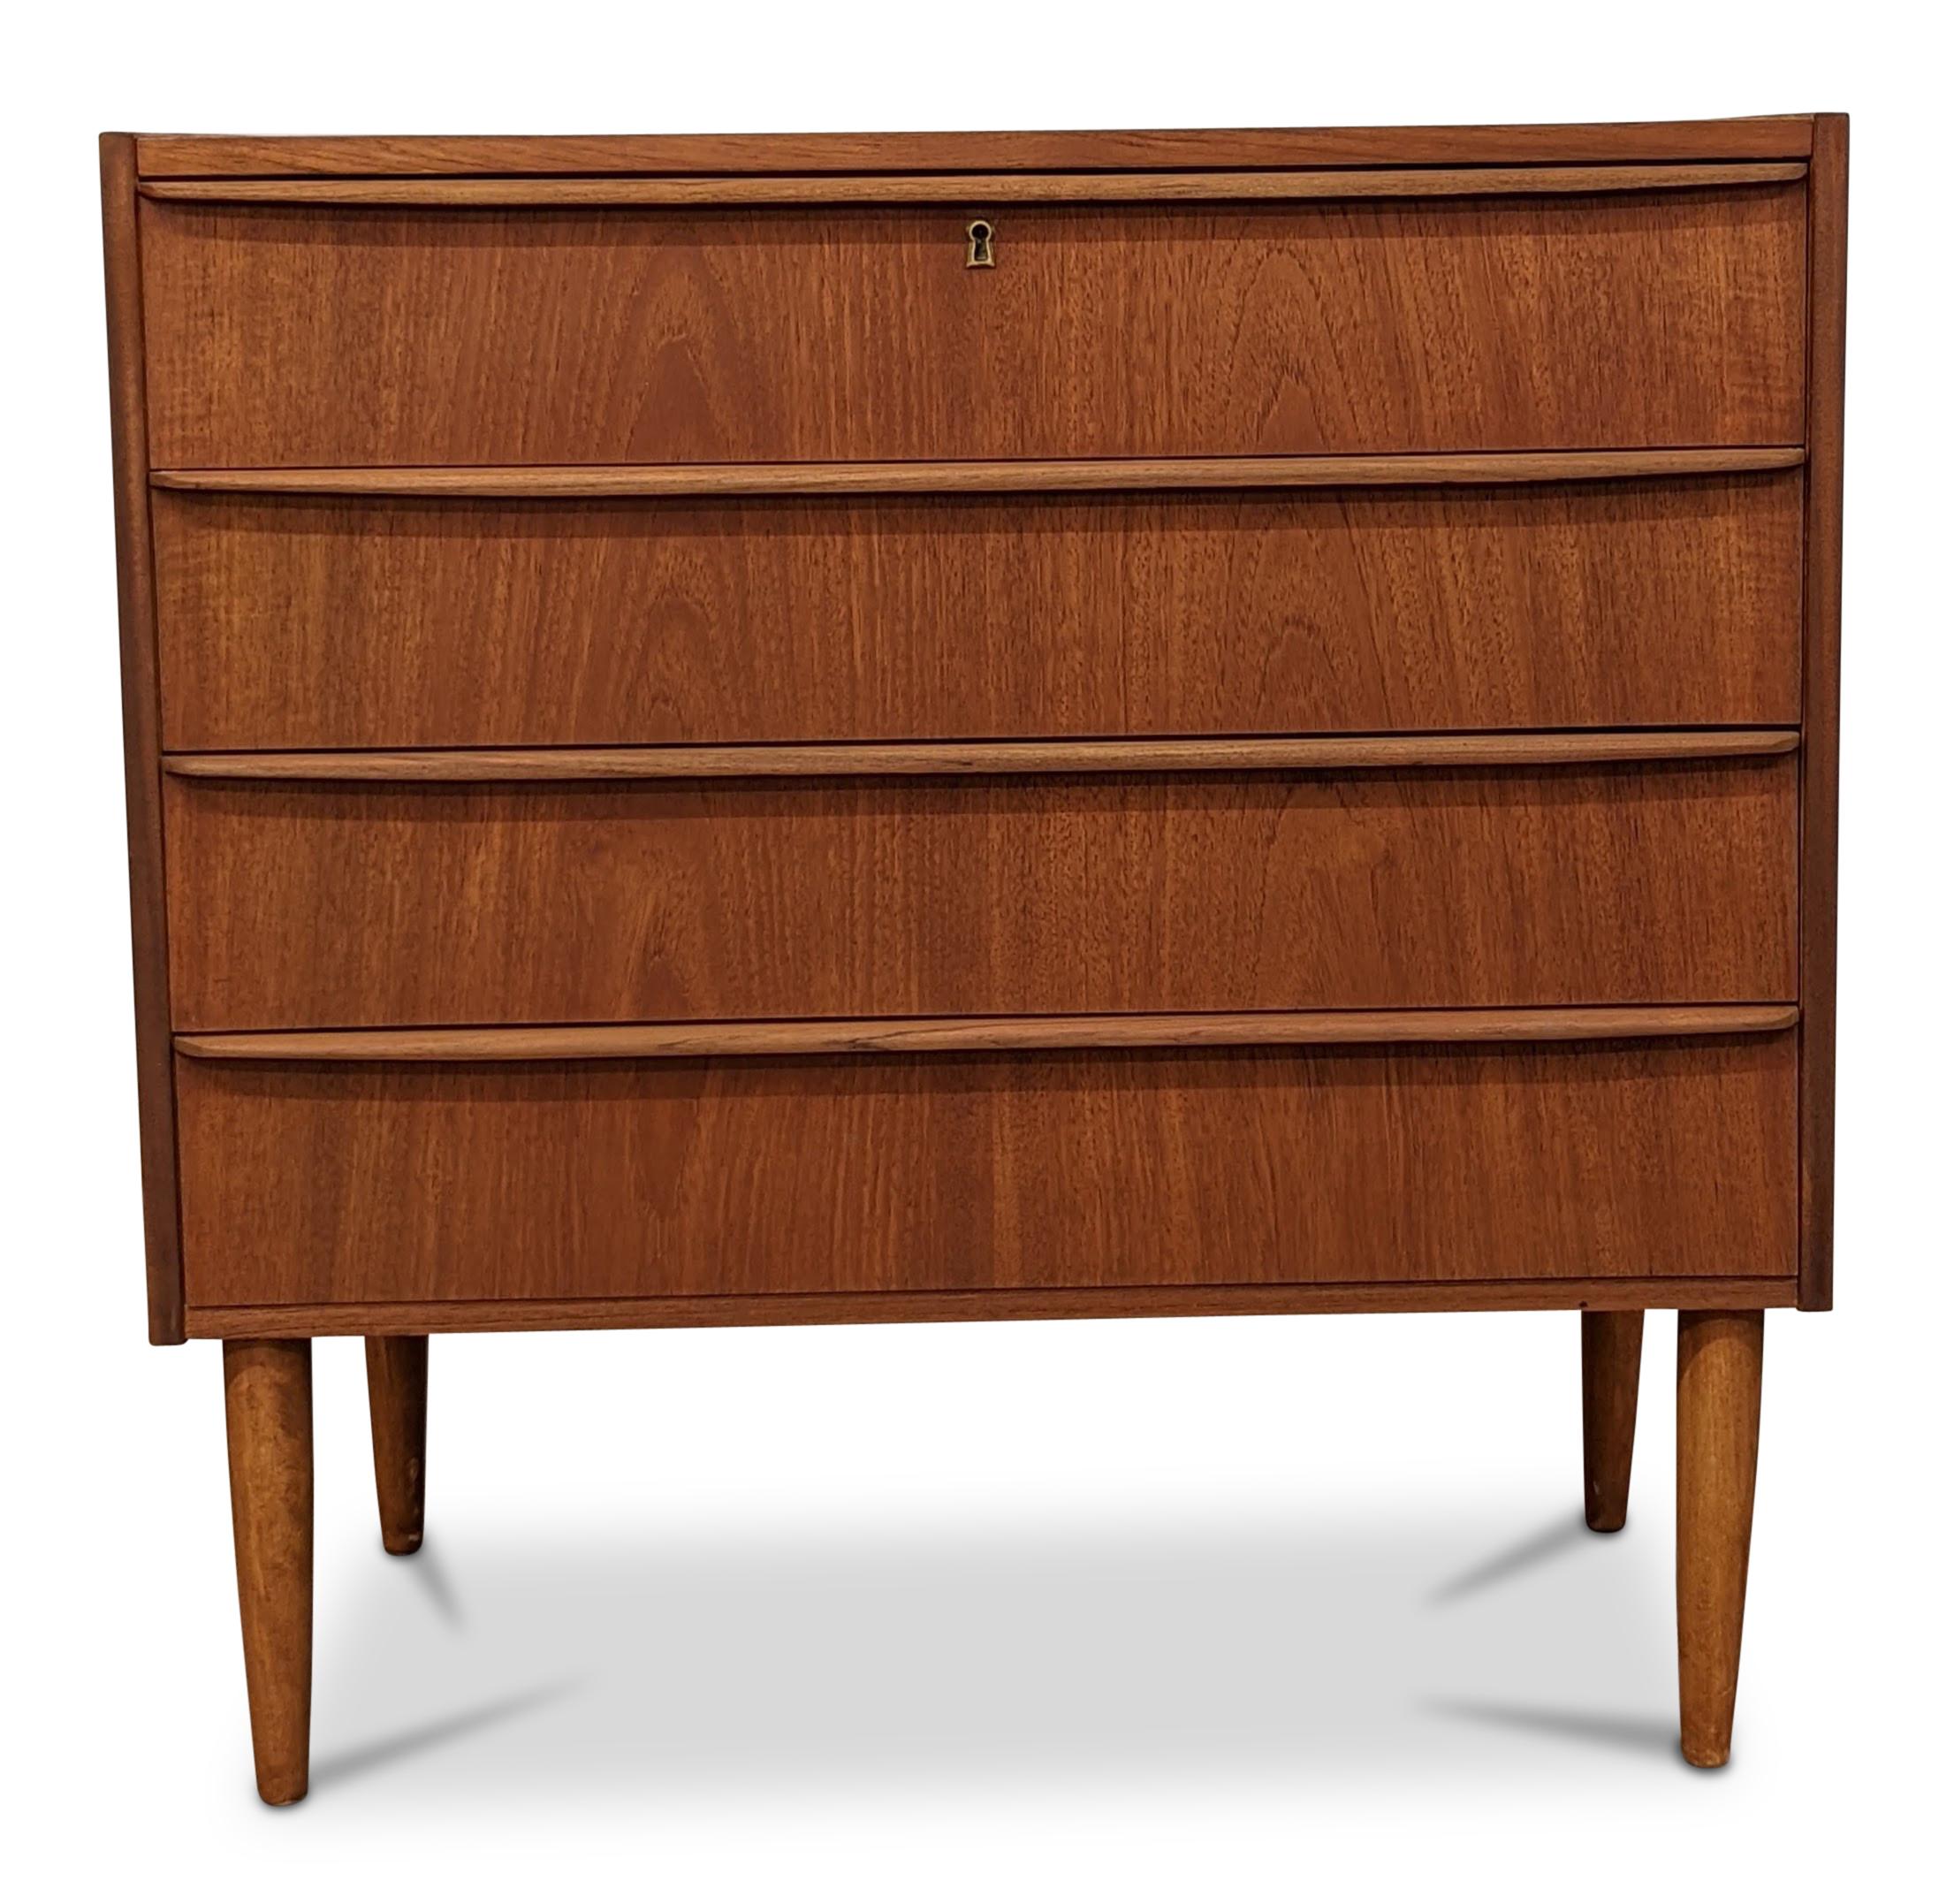 Vintage Danish Mid-Century Modern, made in the 1950's - Recently refurbished
These pieces are more than 65+ years old and some wear and tear can be expected, but we do everything we can to refurbish them in respect to the design.
There is a